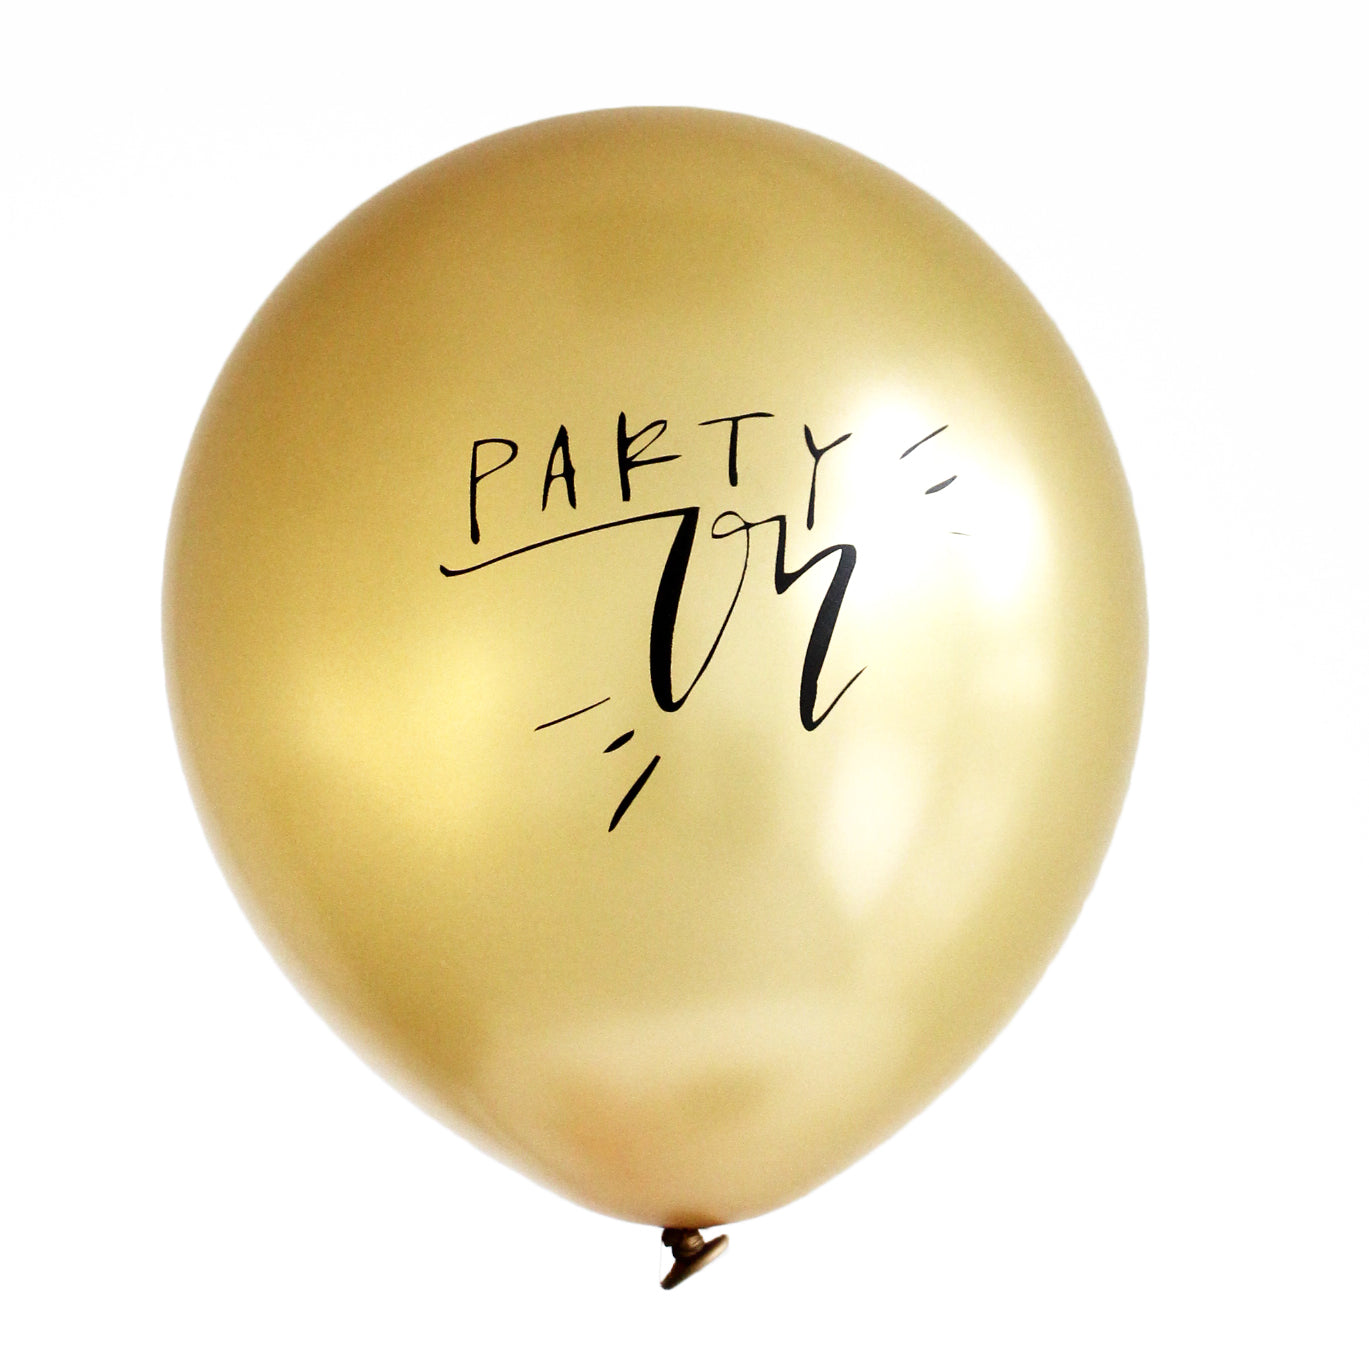 Party On Latex Balloons